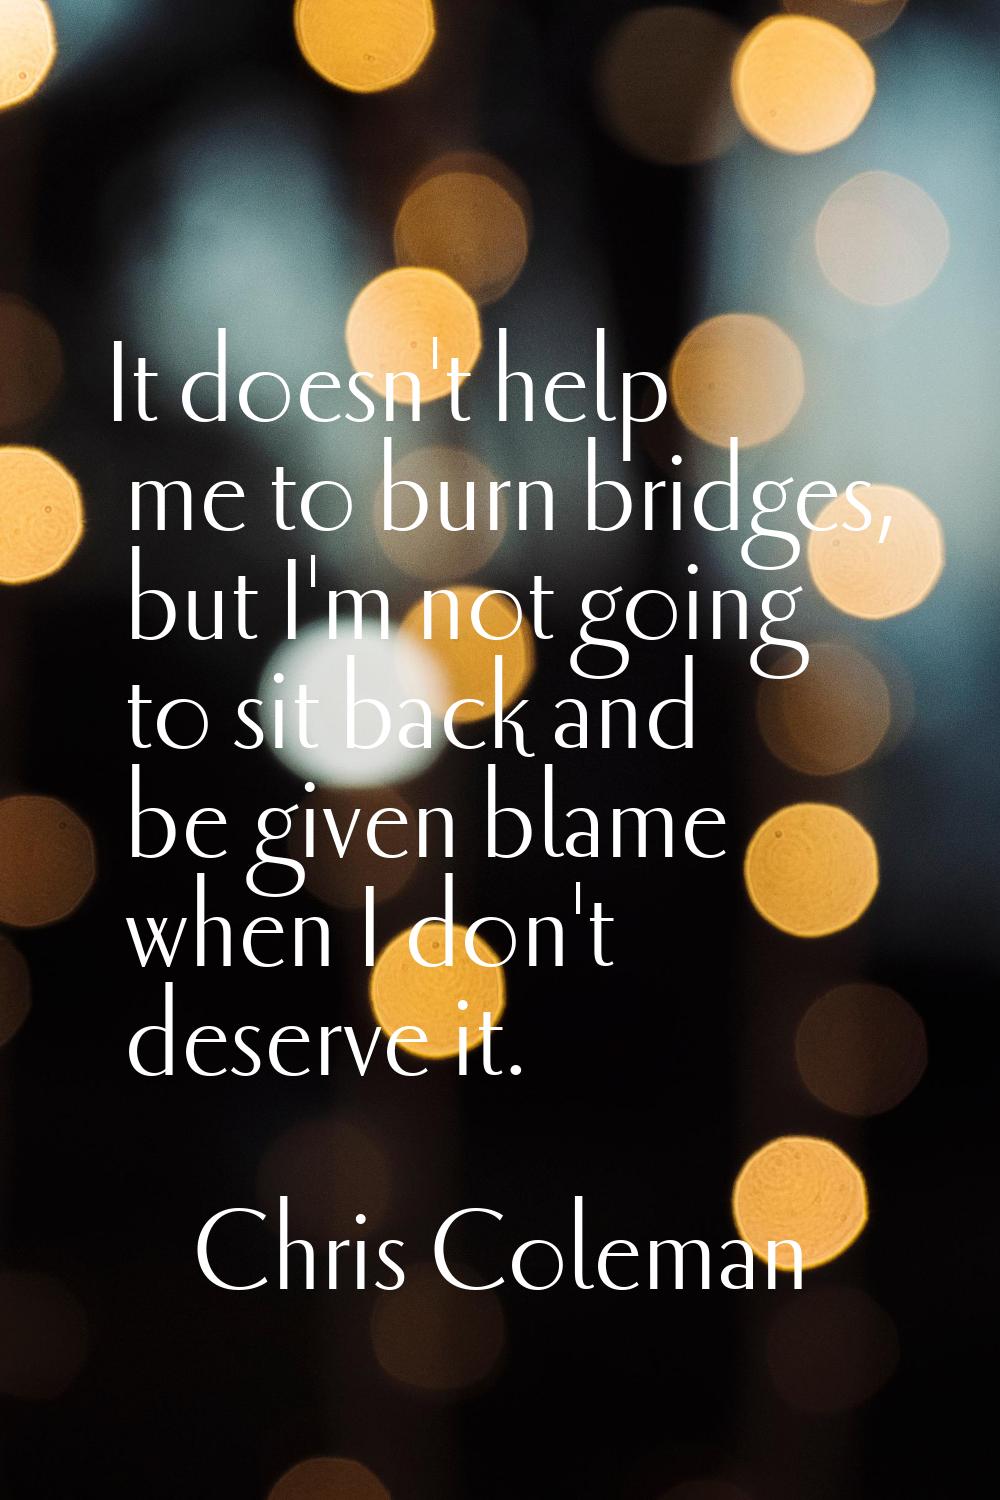 It doesn't help me to burn bridges, but I'm not going to sit back and be given blame when I don't d